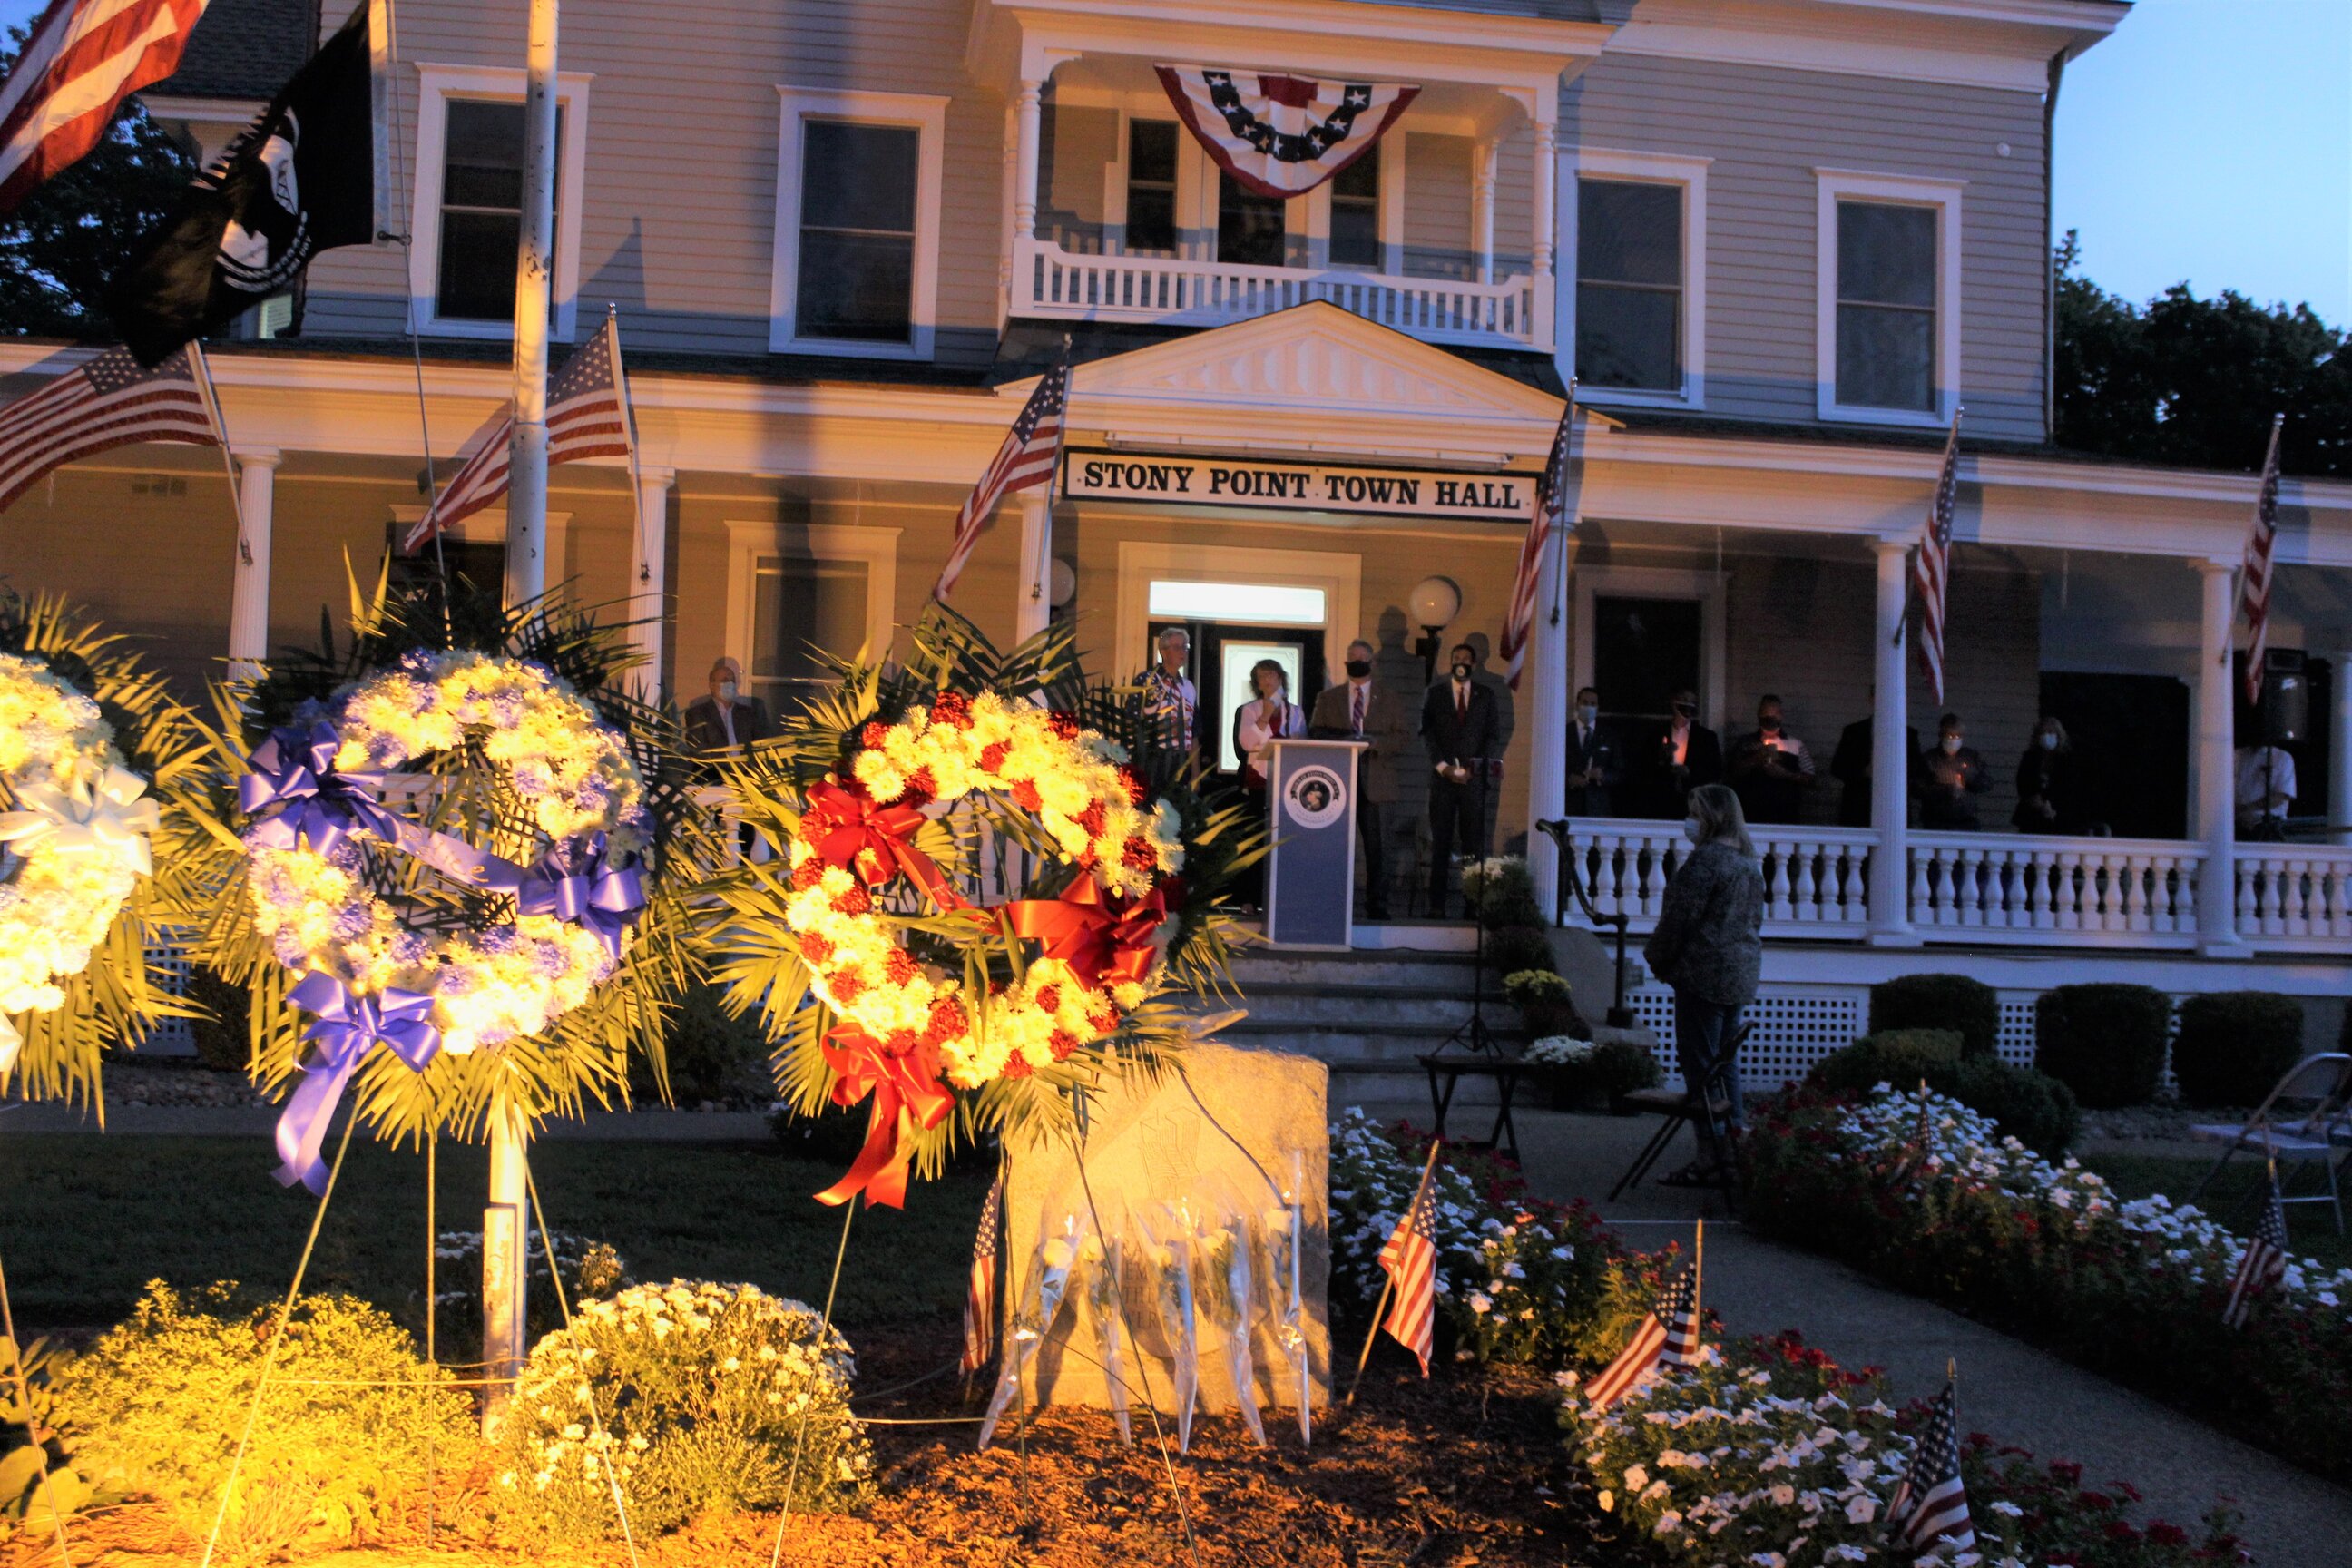 rsz_stony_point_held_its_september_11_memorial_service_at_its_town_hall_photo-kathy_kahn